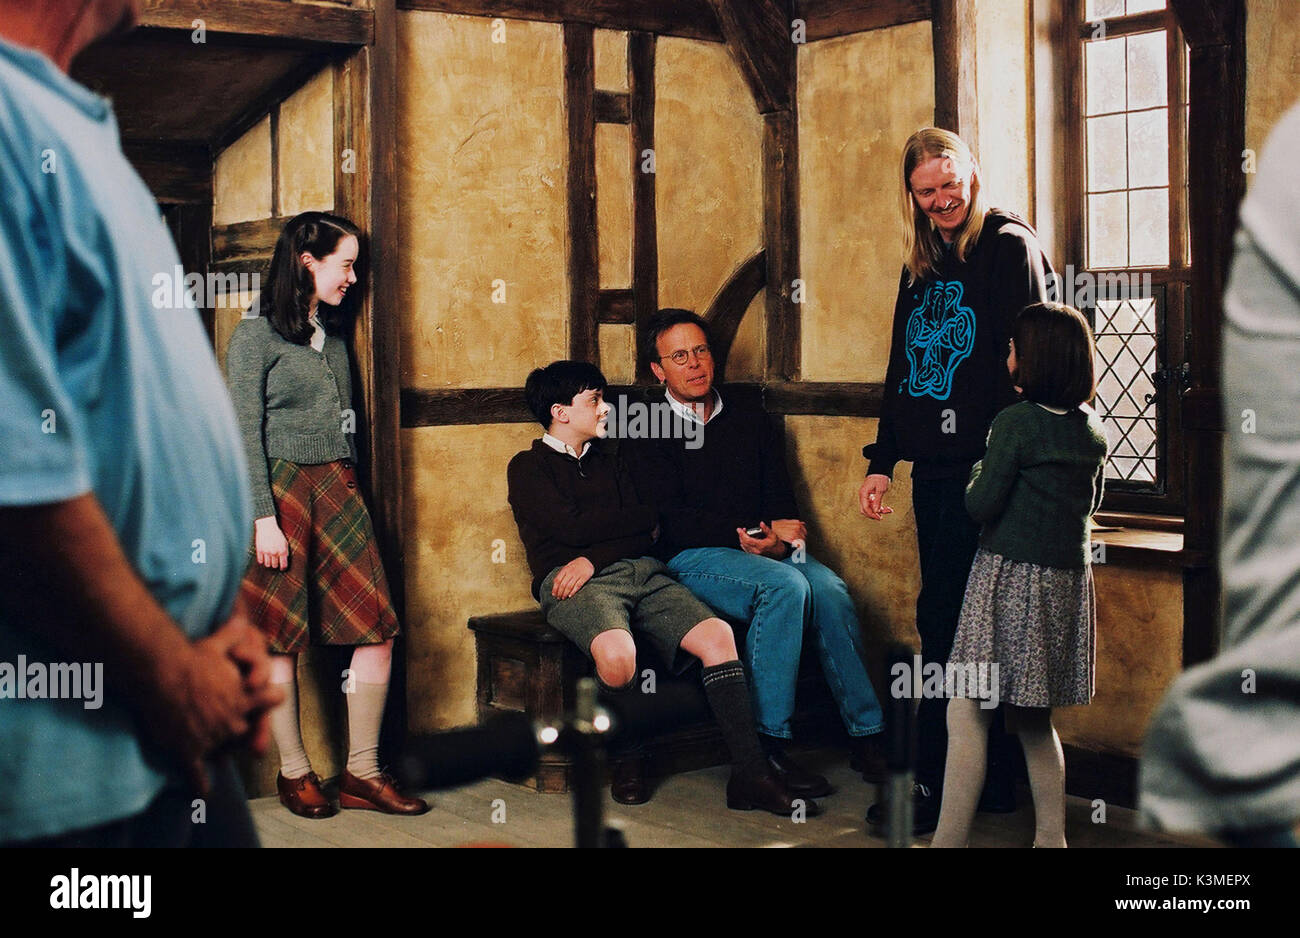 THE CHRONICLES OF NARNIA: THE LION, THE WITCH AND THE WARDROBE [US / BR 2005] (L-R) ANNA POPPLEWELL, SKANDAR KEYNES, Producer MARK JOHNSON, Director ANDREW ADAMSON, GEORGIE HENLEY     Date: 2005 Stock Photo